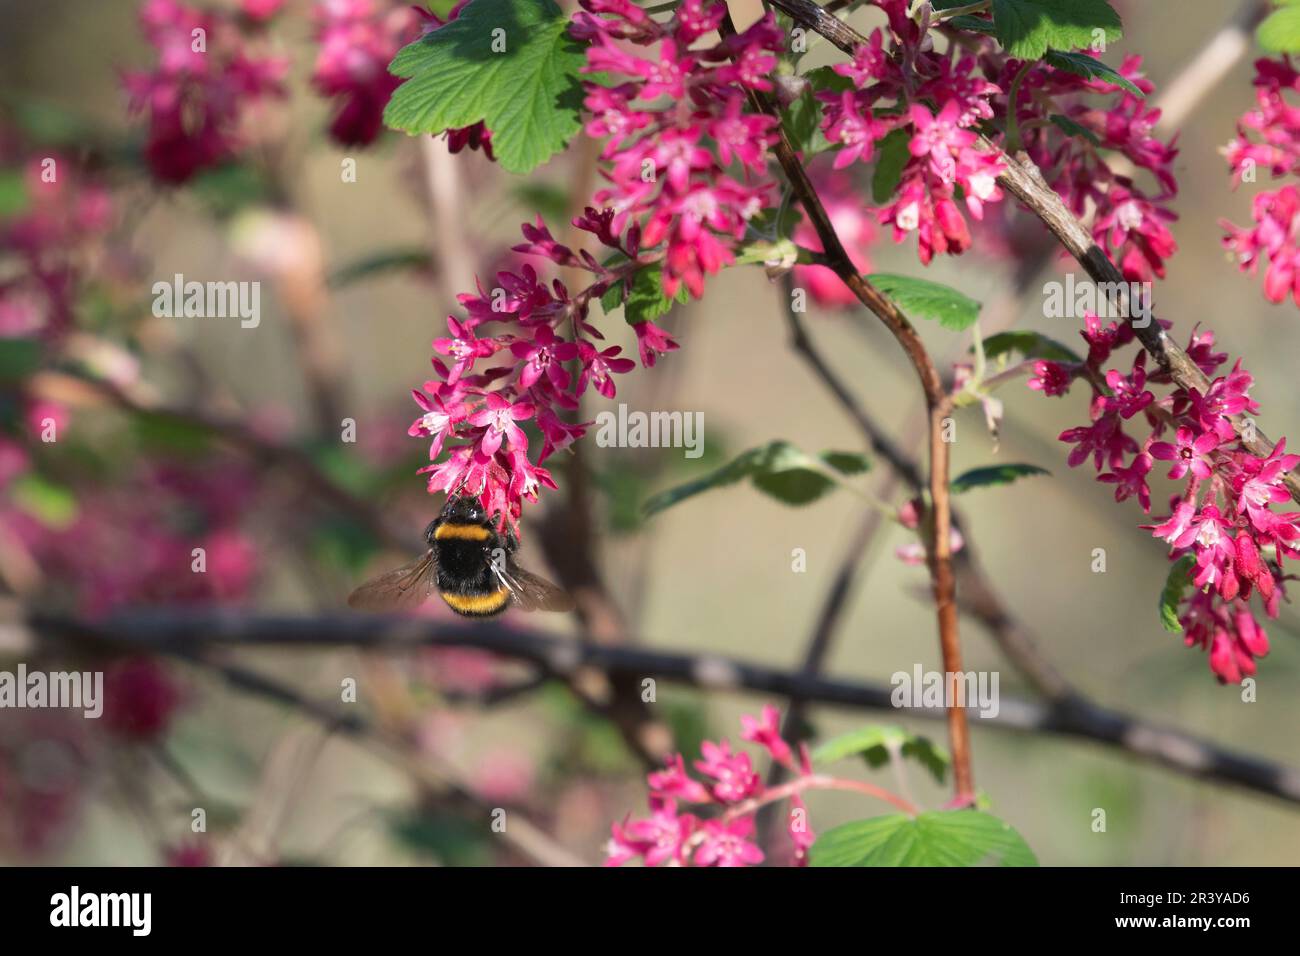 A White-tailed Bumblebee (Bombus Lucorum) Foraging on the Reddish-pink Flowers of a Red-flowering Currant (Ribes Sanguineum) Bush in April Stock Photo